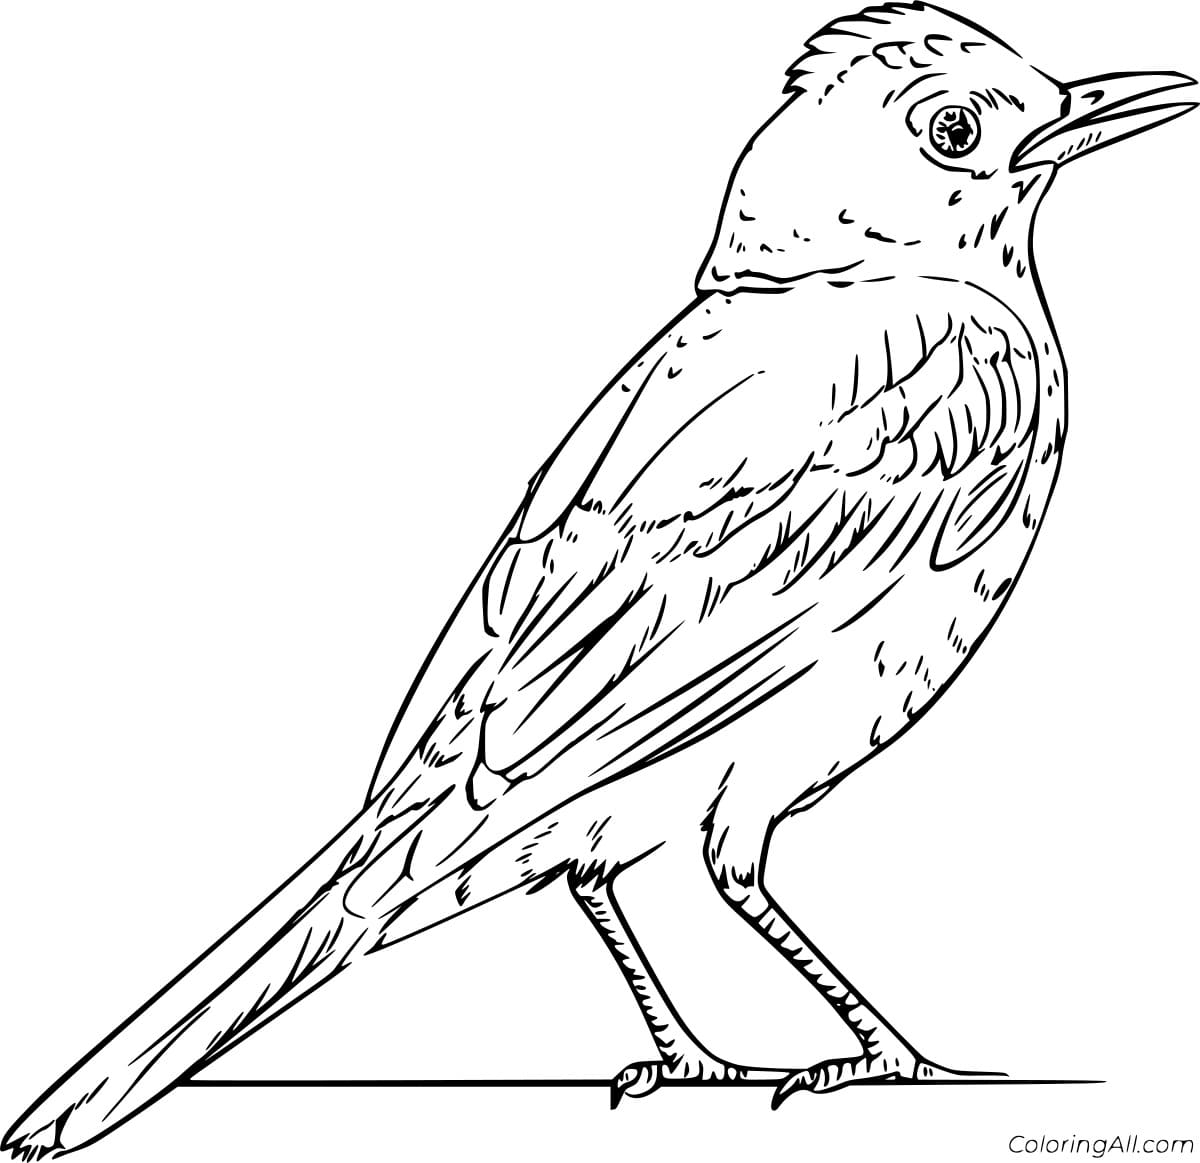 Realistic Robin Image For Kids Coloring Page